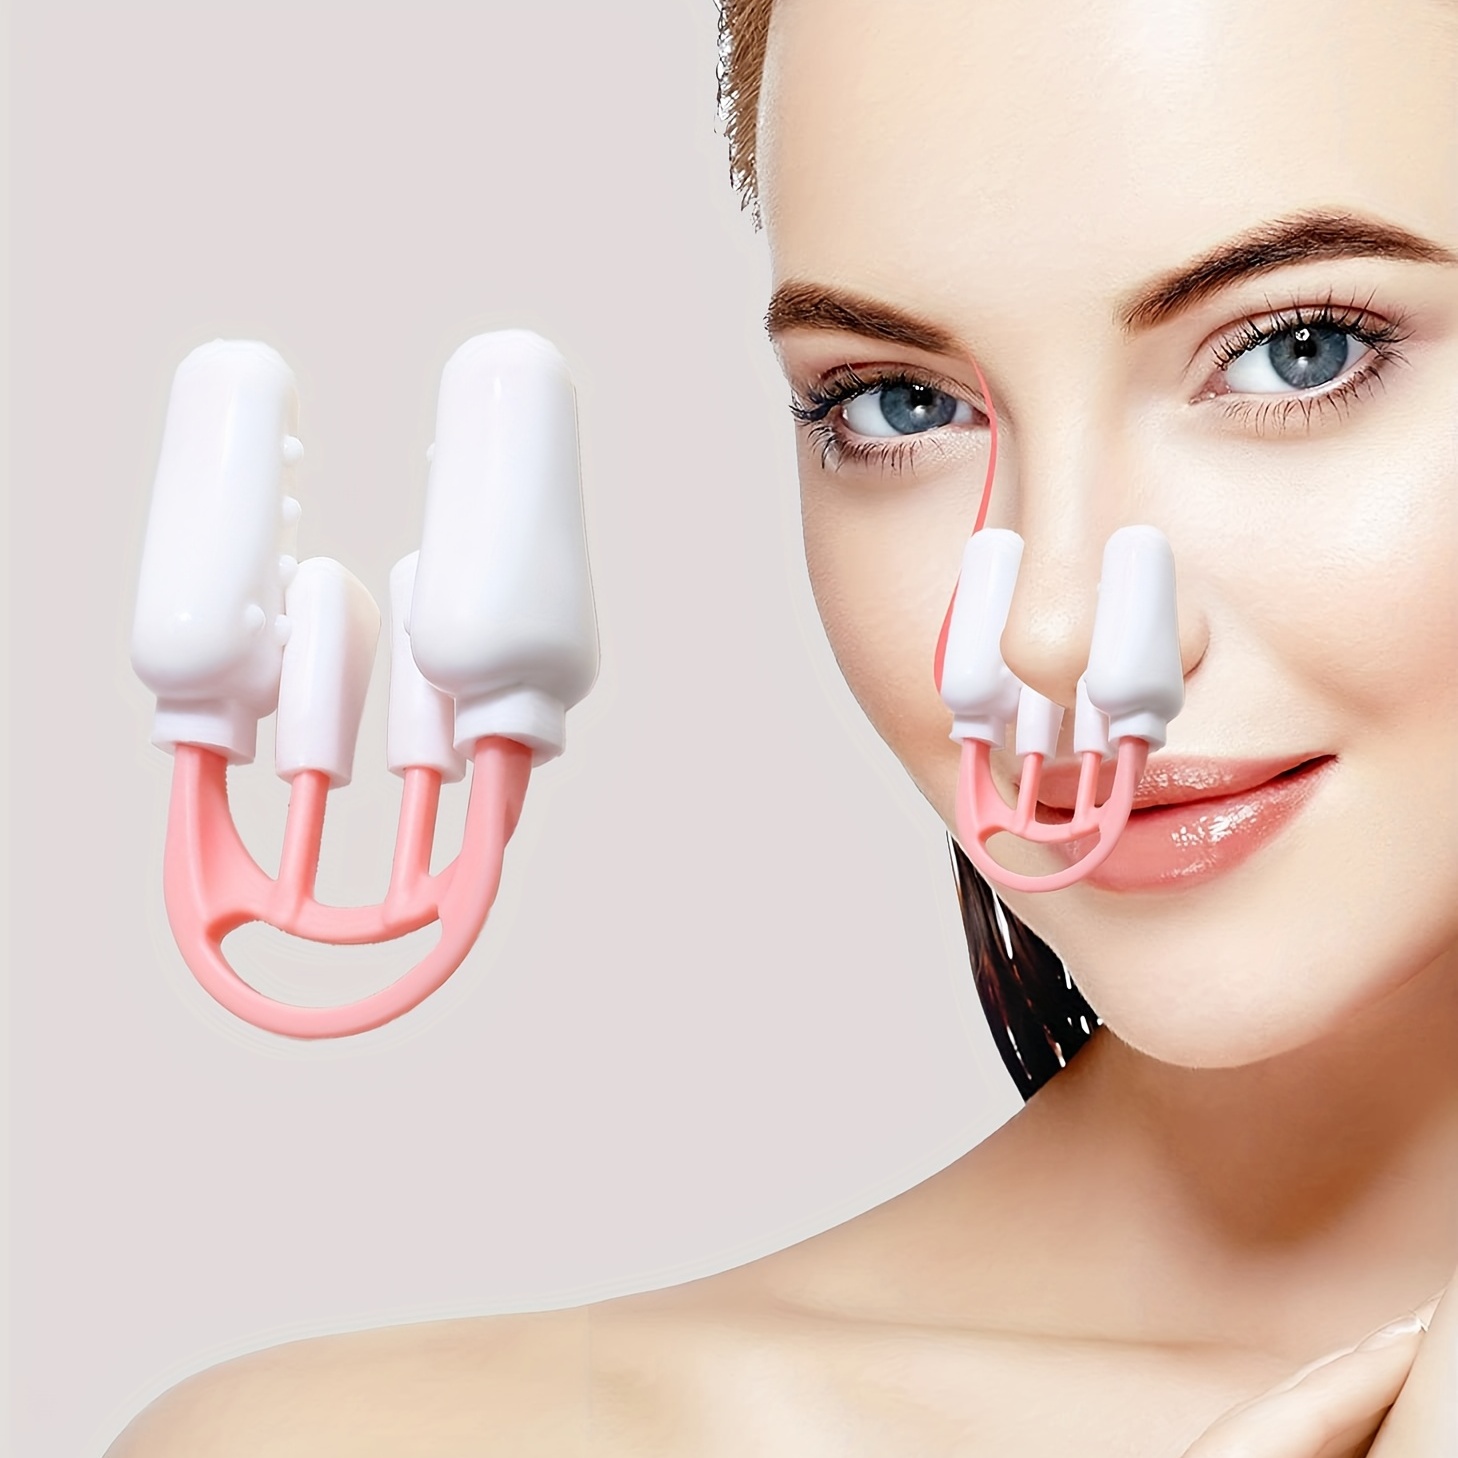 Nose Shaper Clip Nose Up Lifting Shaping Bridge Straightening Slimmer  Device Silicone Nose Slimmer No Painful Hurt Beauty Tools - AliExpress